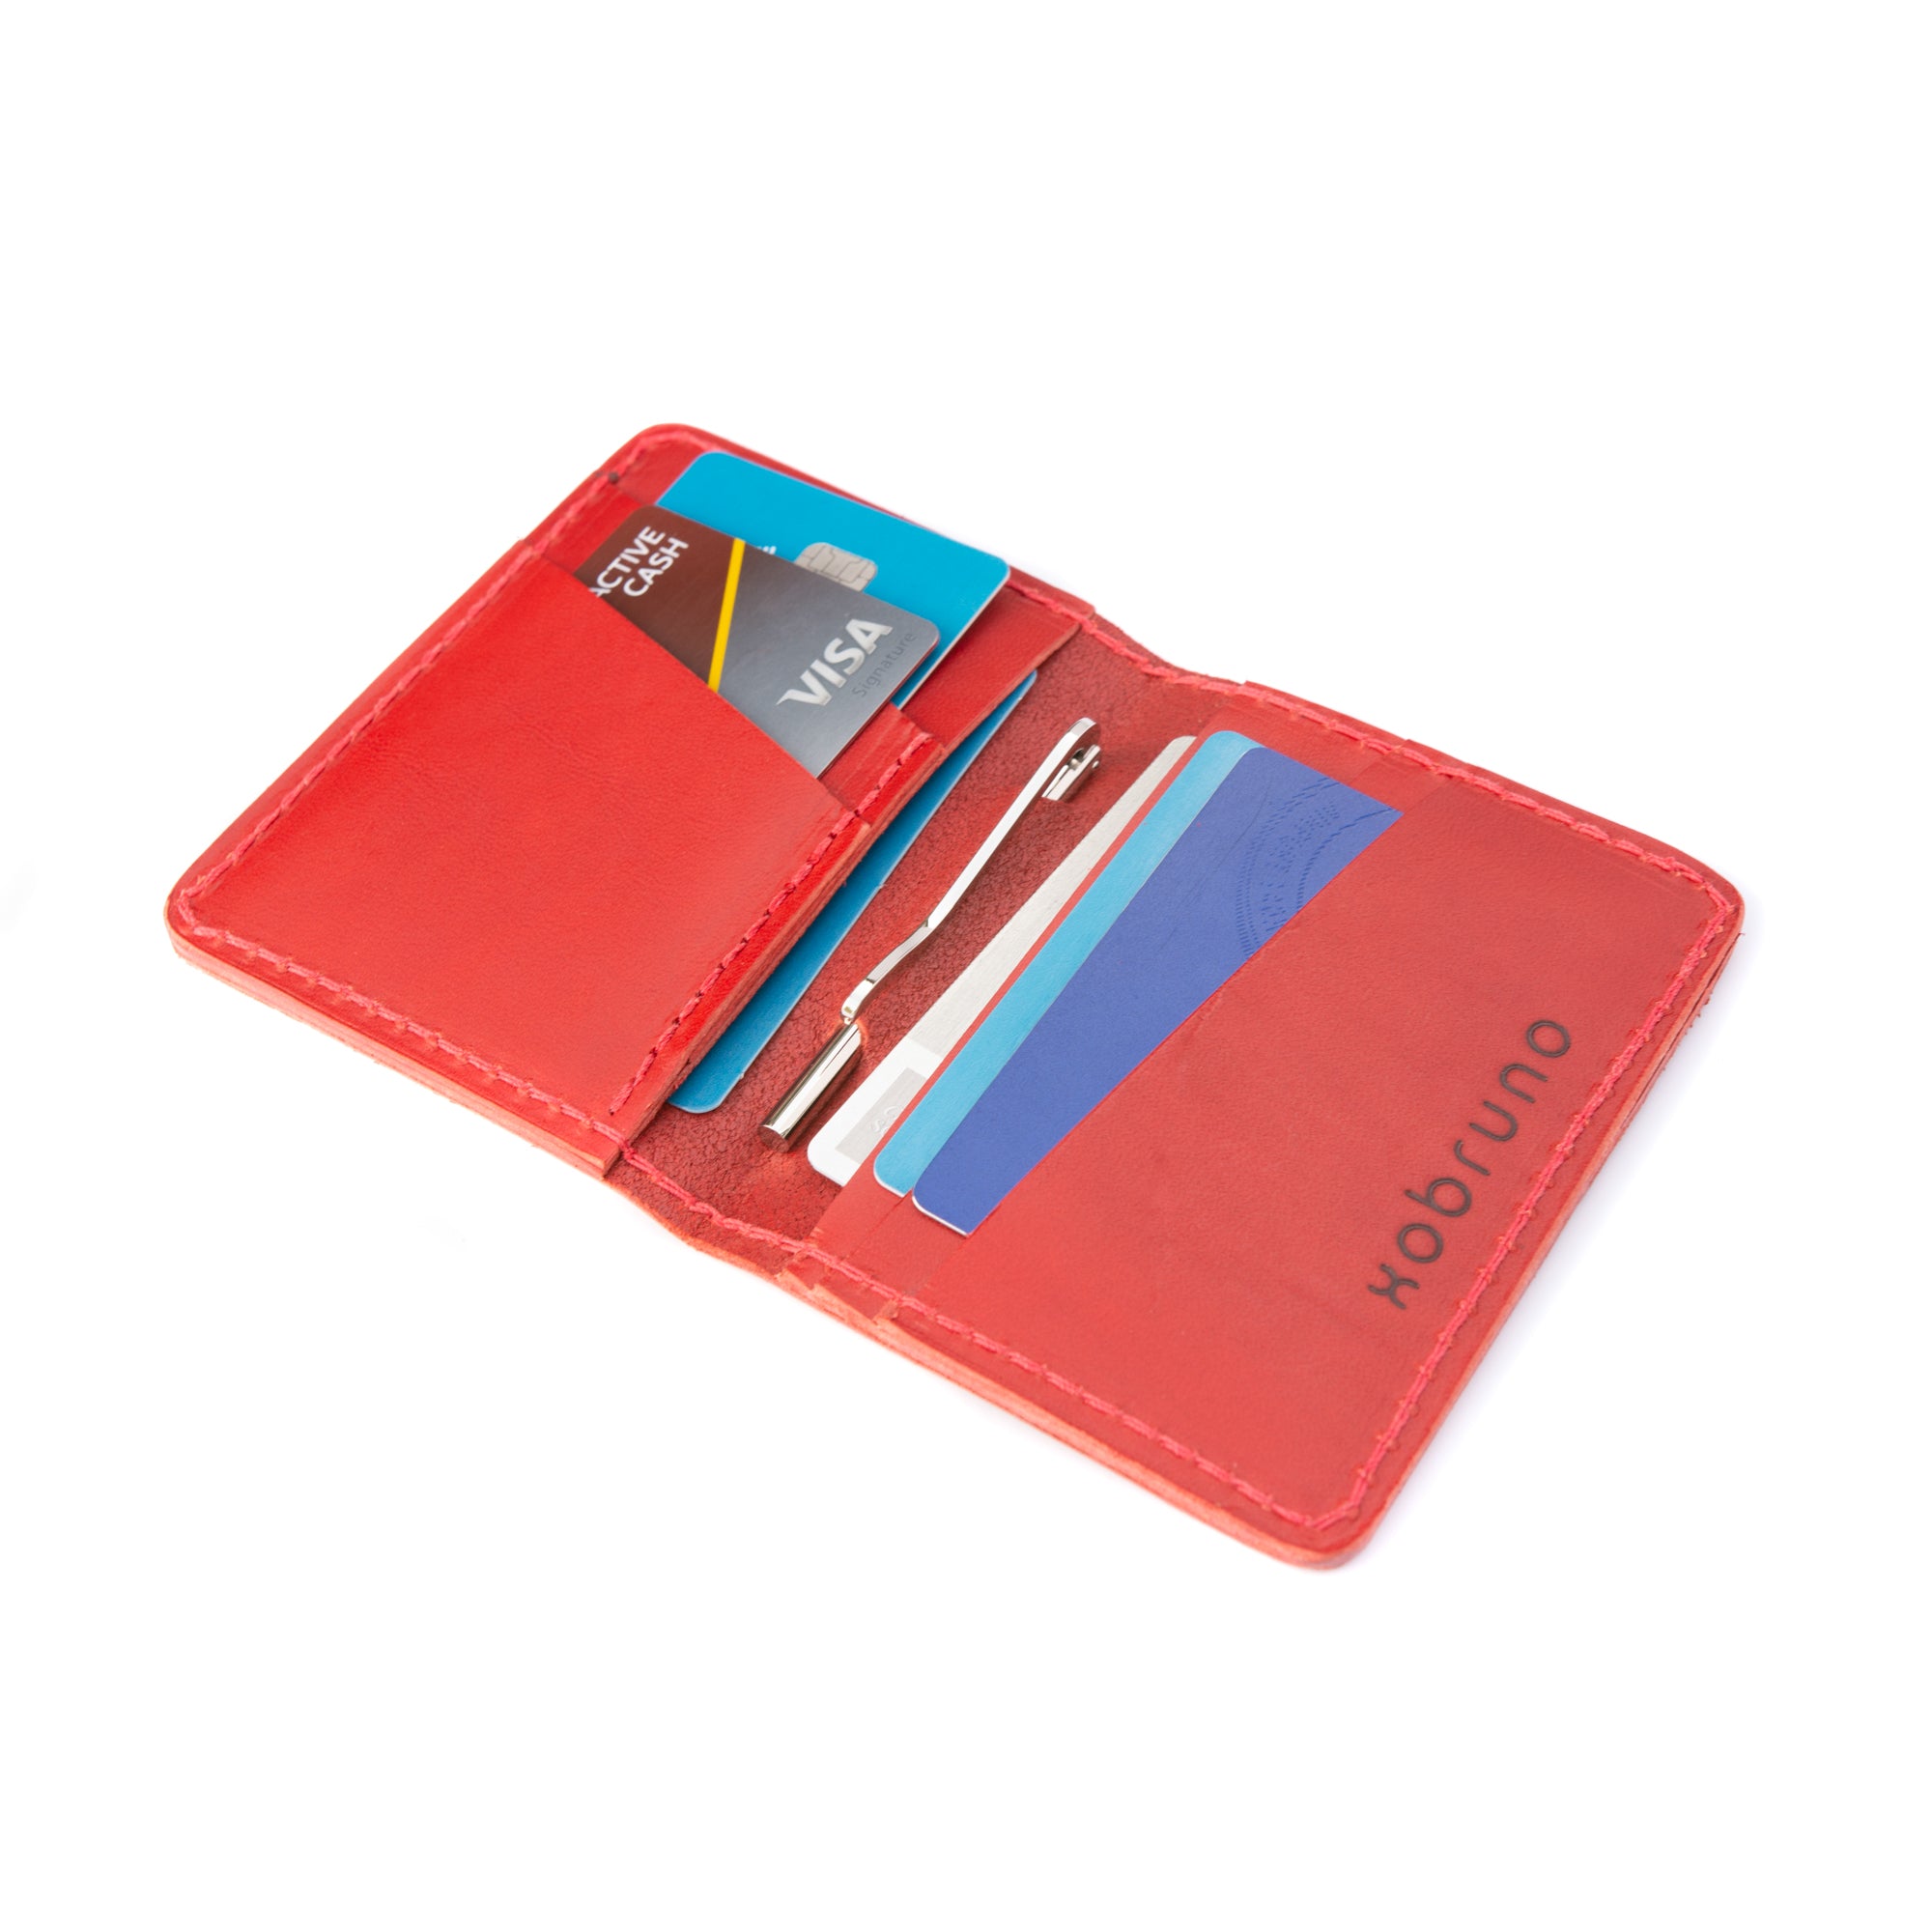 The Ankeny Wallet